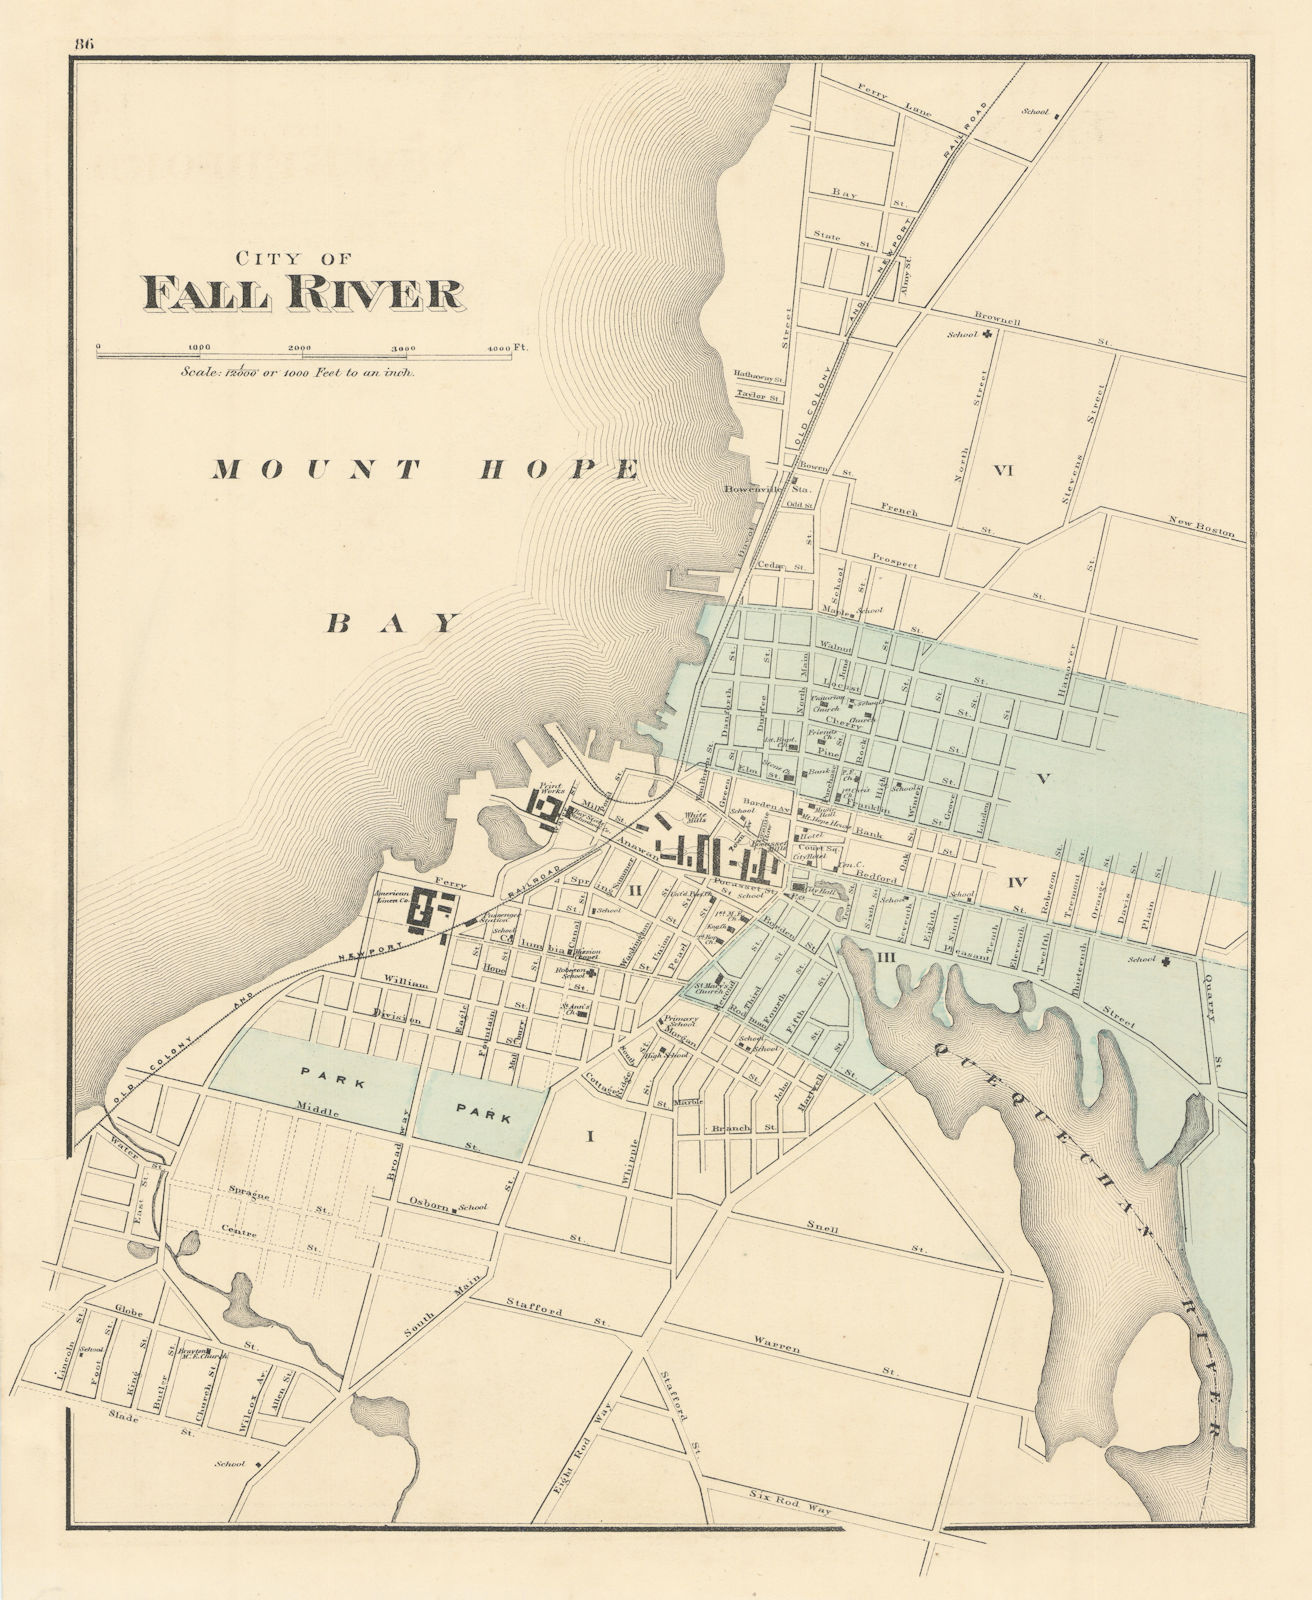 City of Fall River, Massachusetts. Town plan. WALLING & GRAY 1871 old map